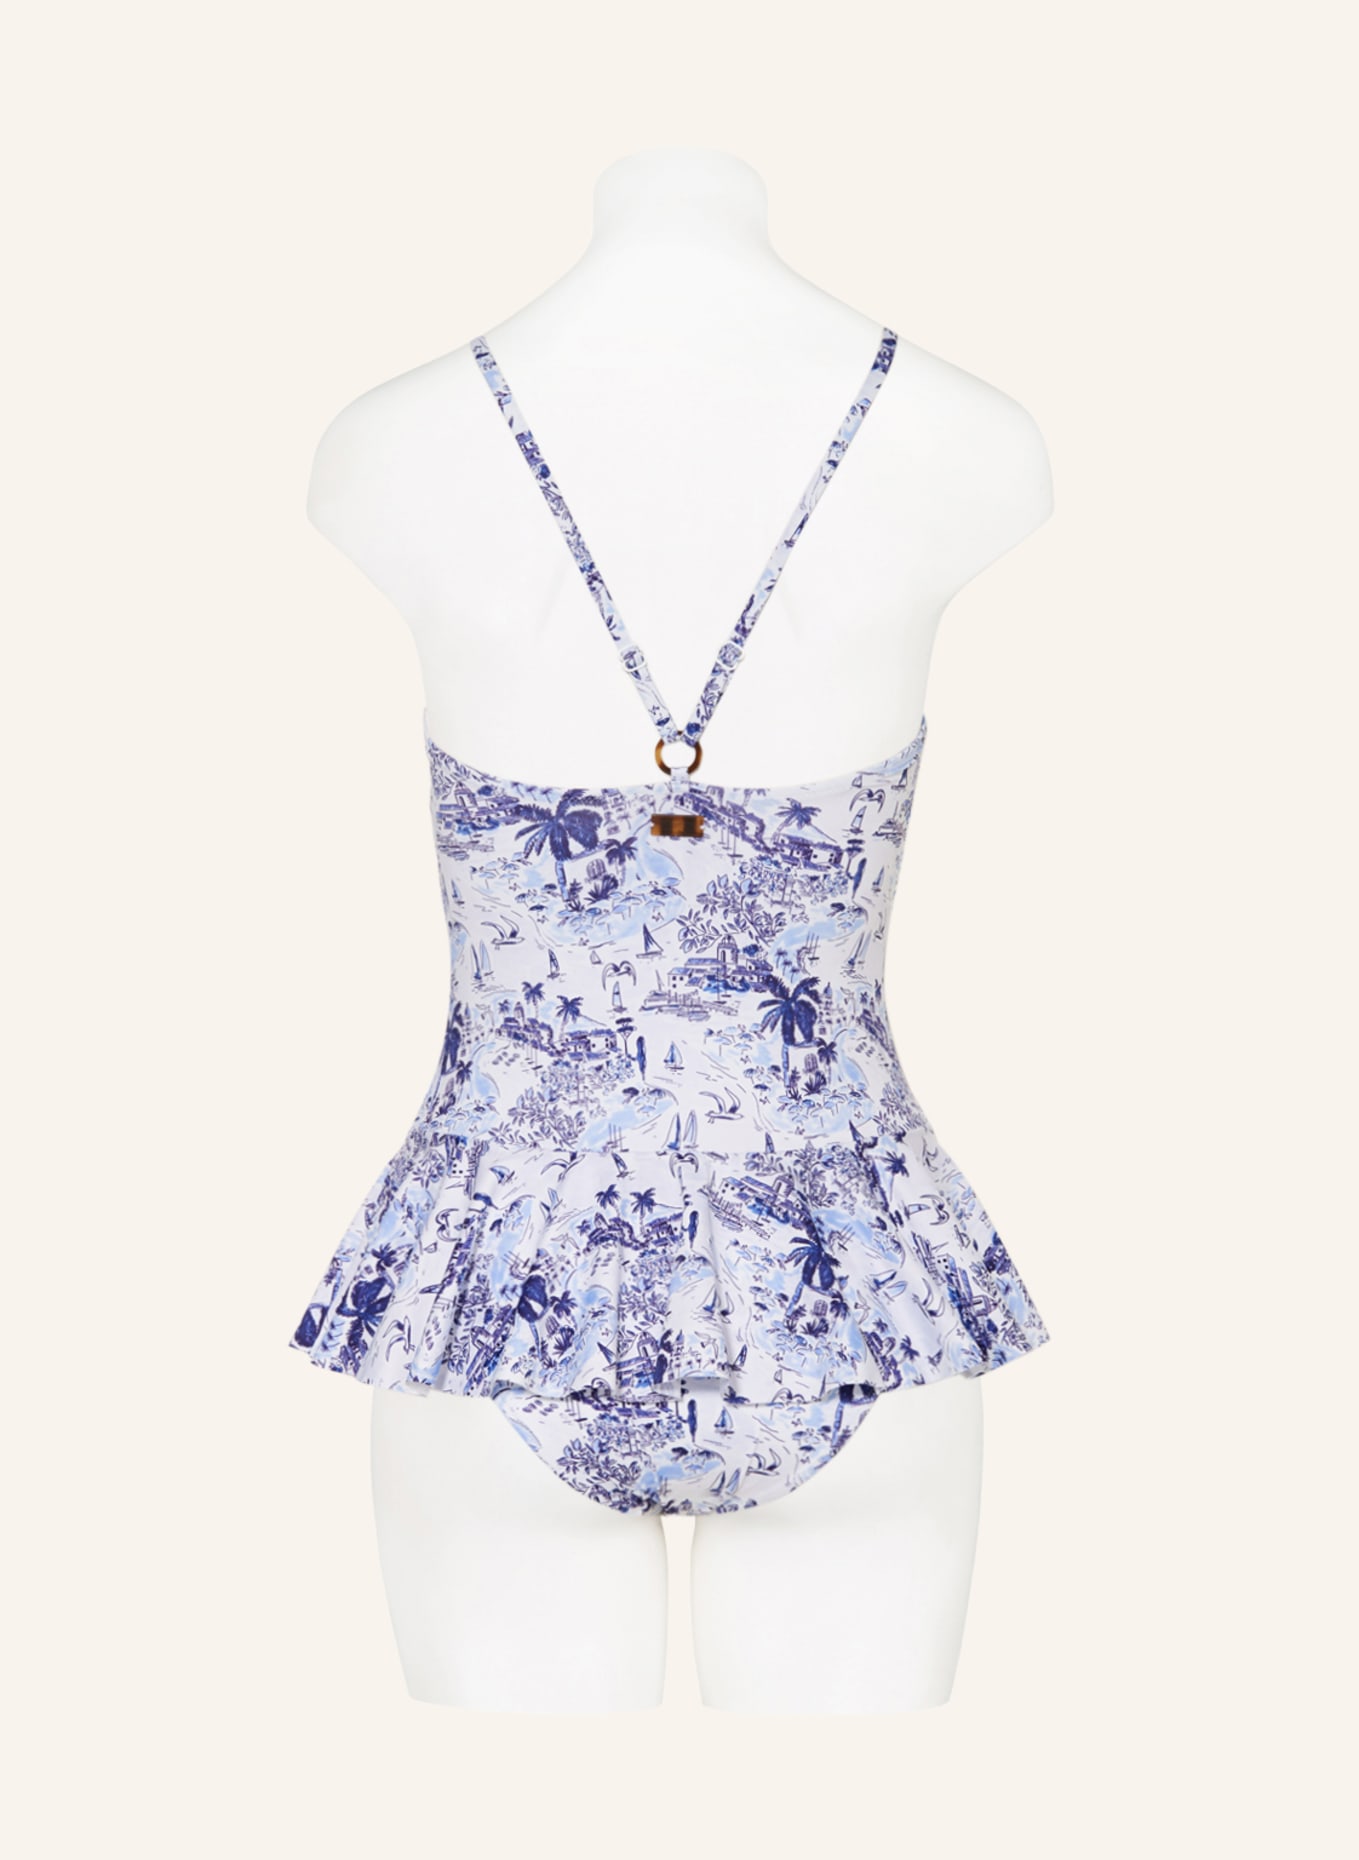 VILEBREQUIN Swimsuit RIVIERA FRILLY, Color: WHITE/ DARK BLUE/ LIGHT BLUE (Image 3)